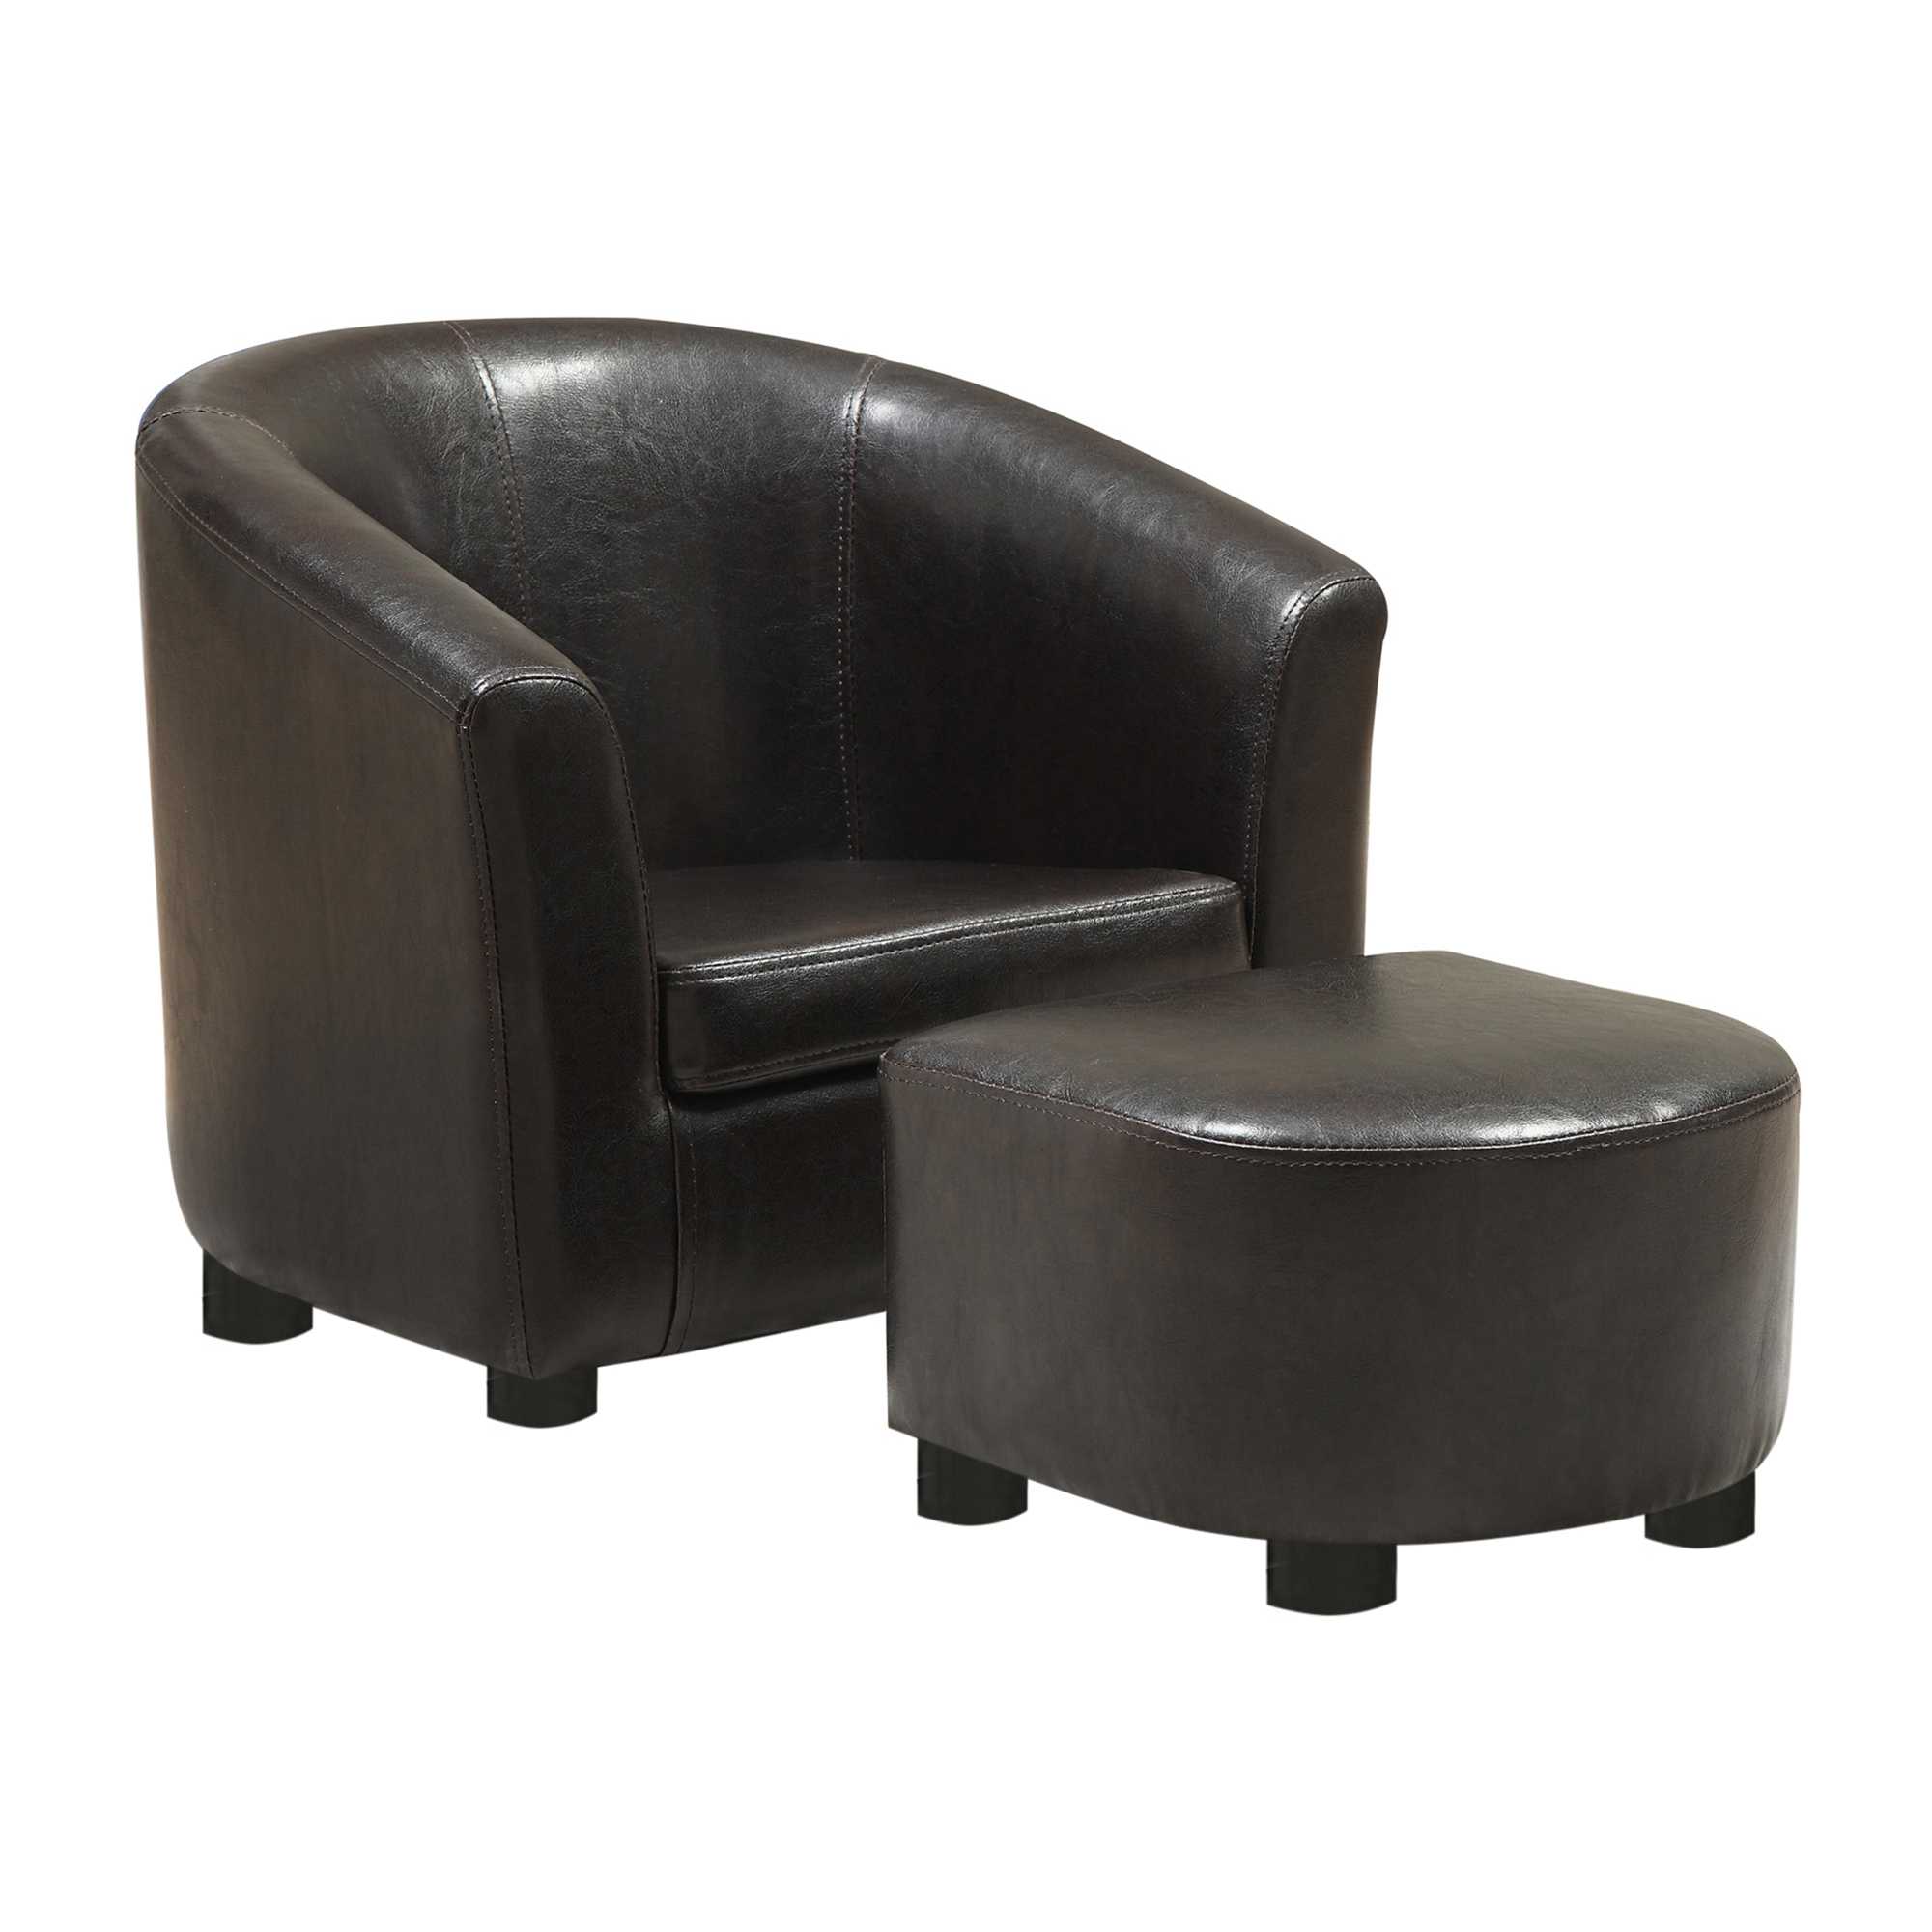 30.5" x 33" x 26" Dark Brown Leather Look Chair Set of 2